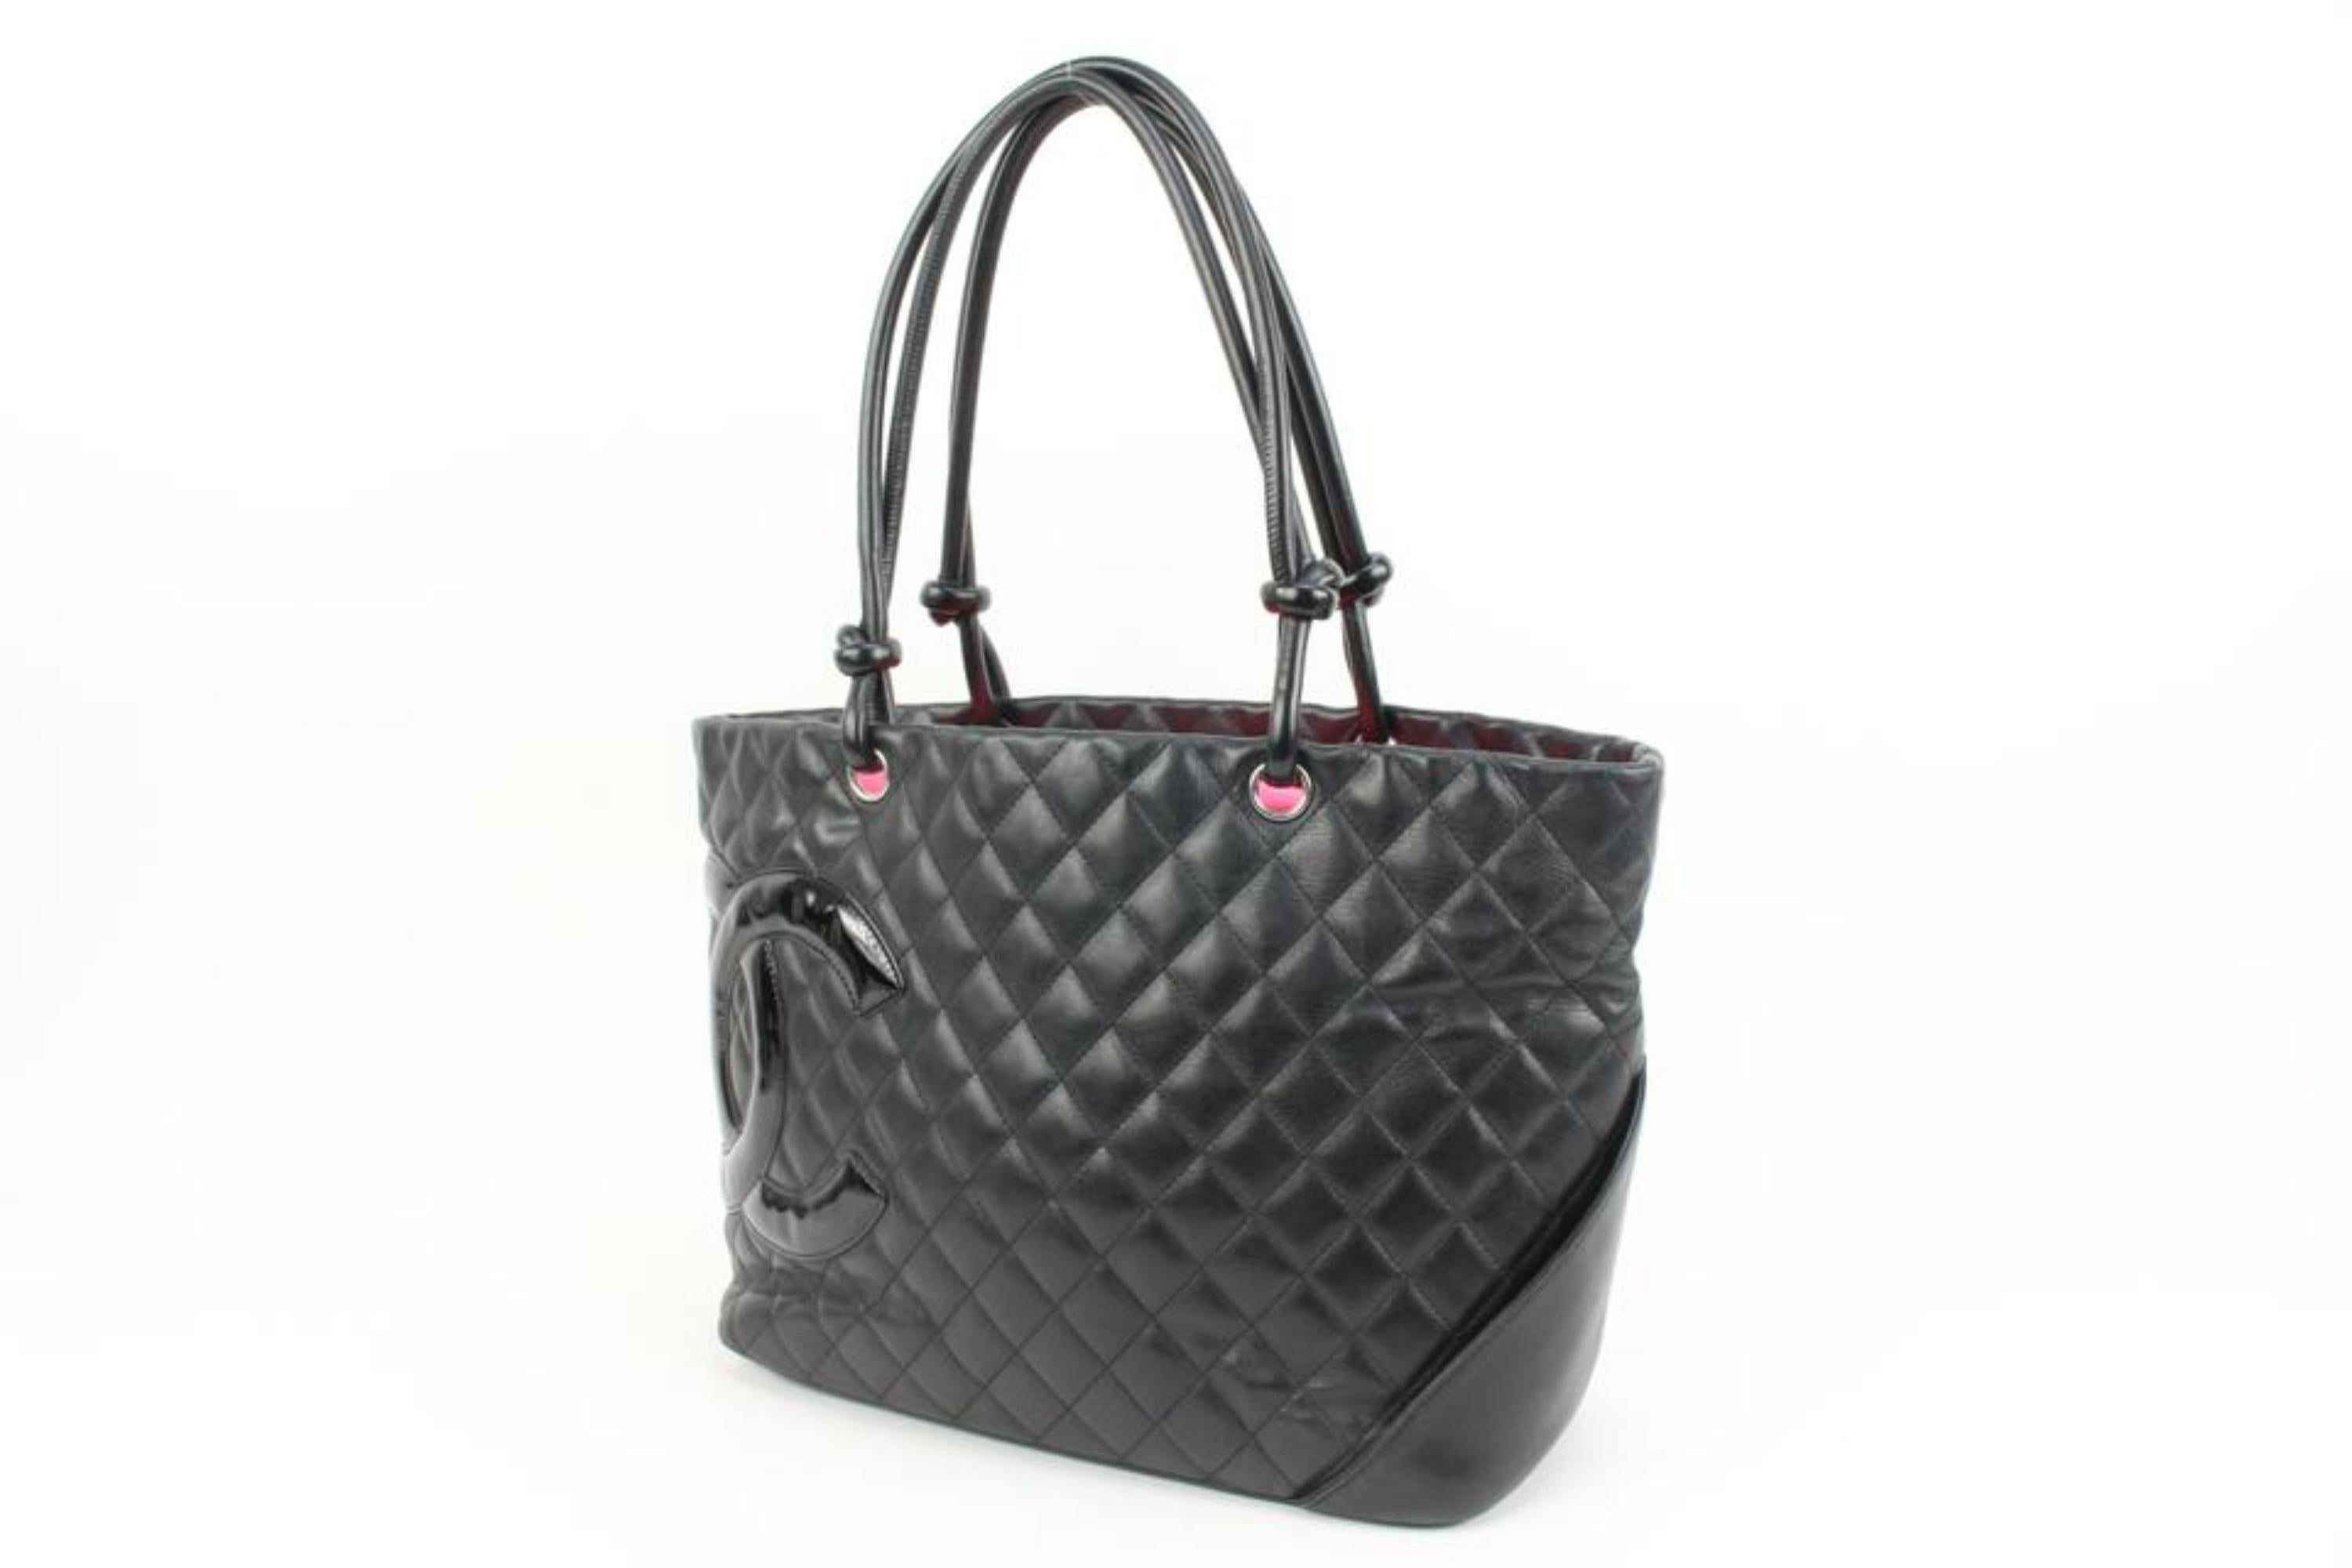 Chanel Black Quilted Cambon Tote Bag 45ck18
Date Code/Serial Number: 3526953
Made In: Italy
Measurements: Length:  16